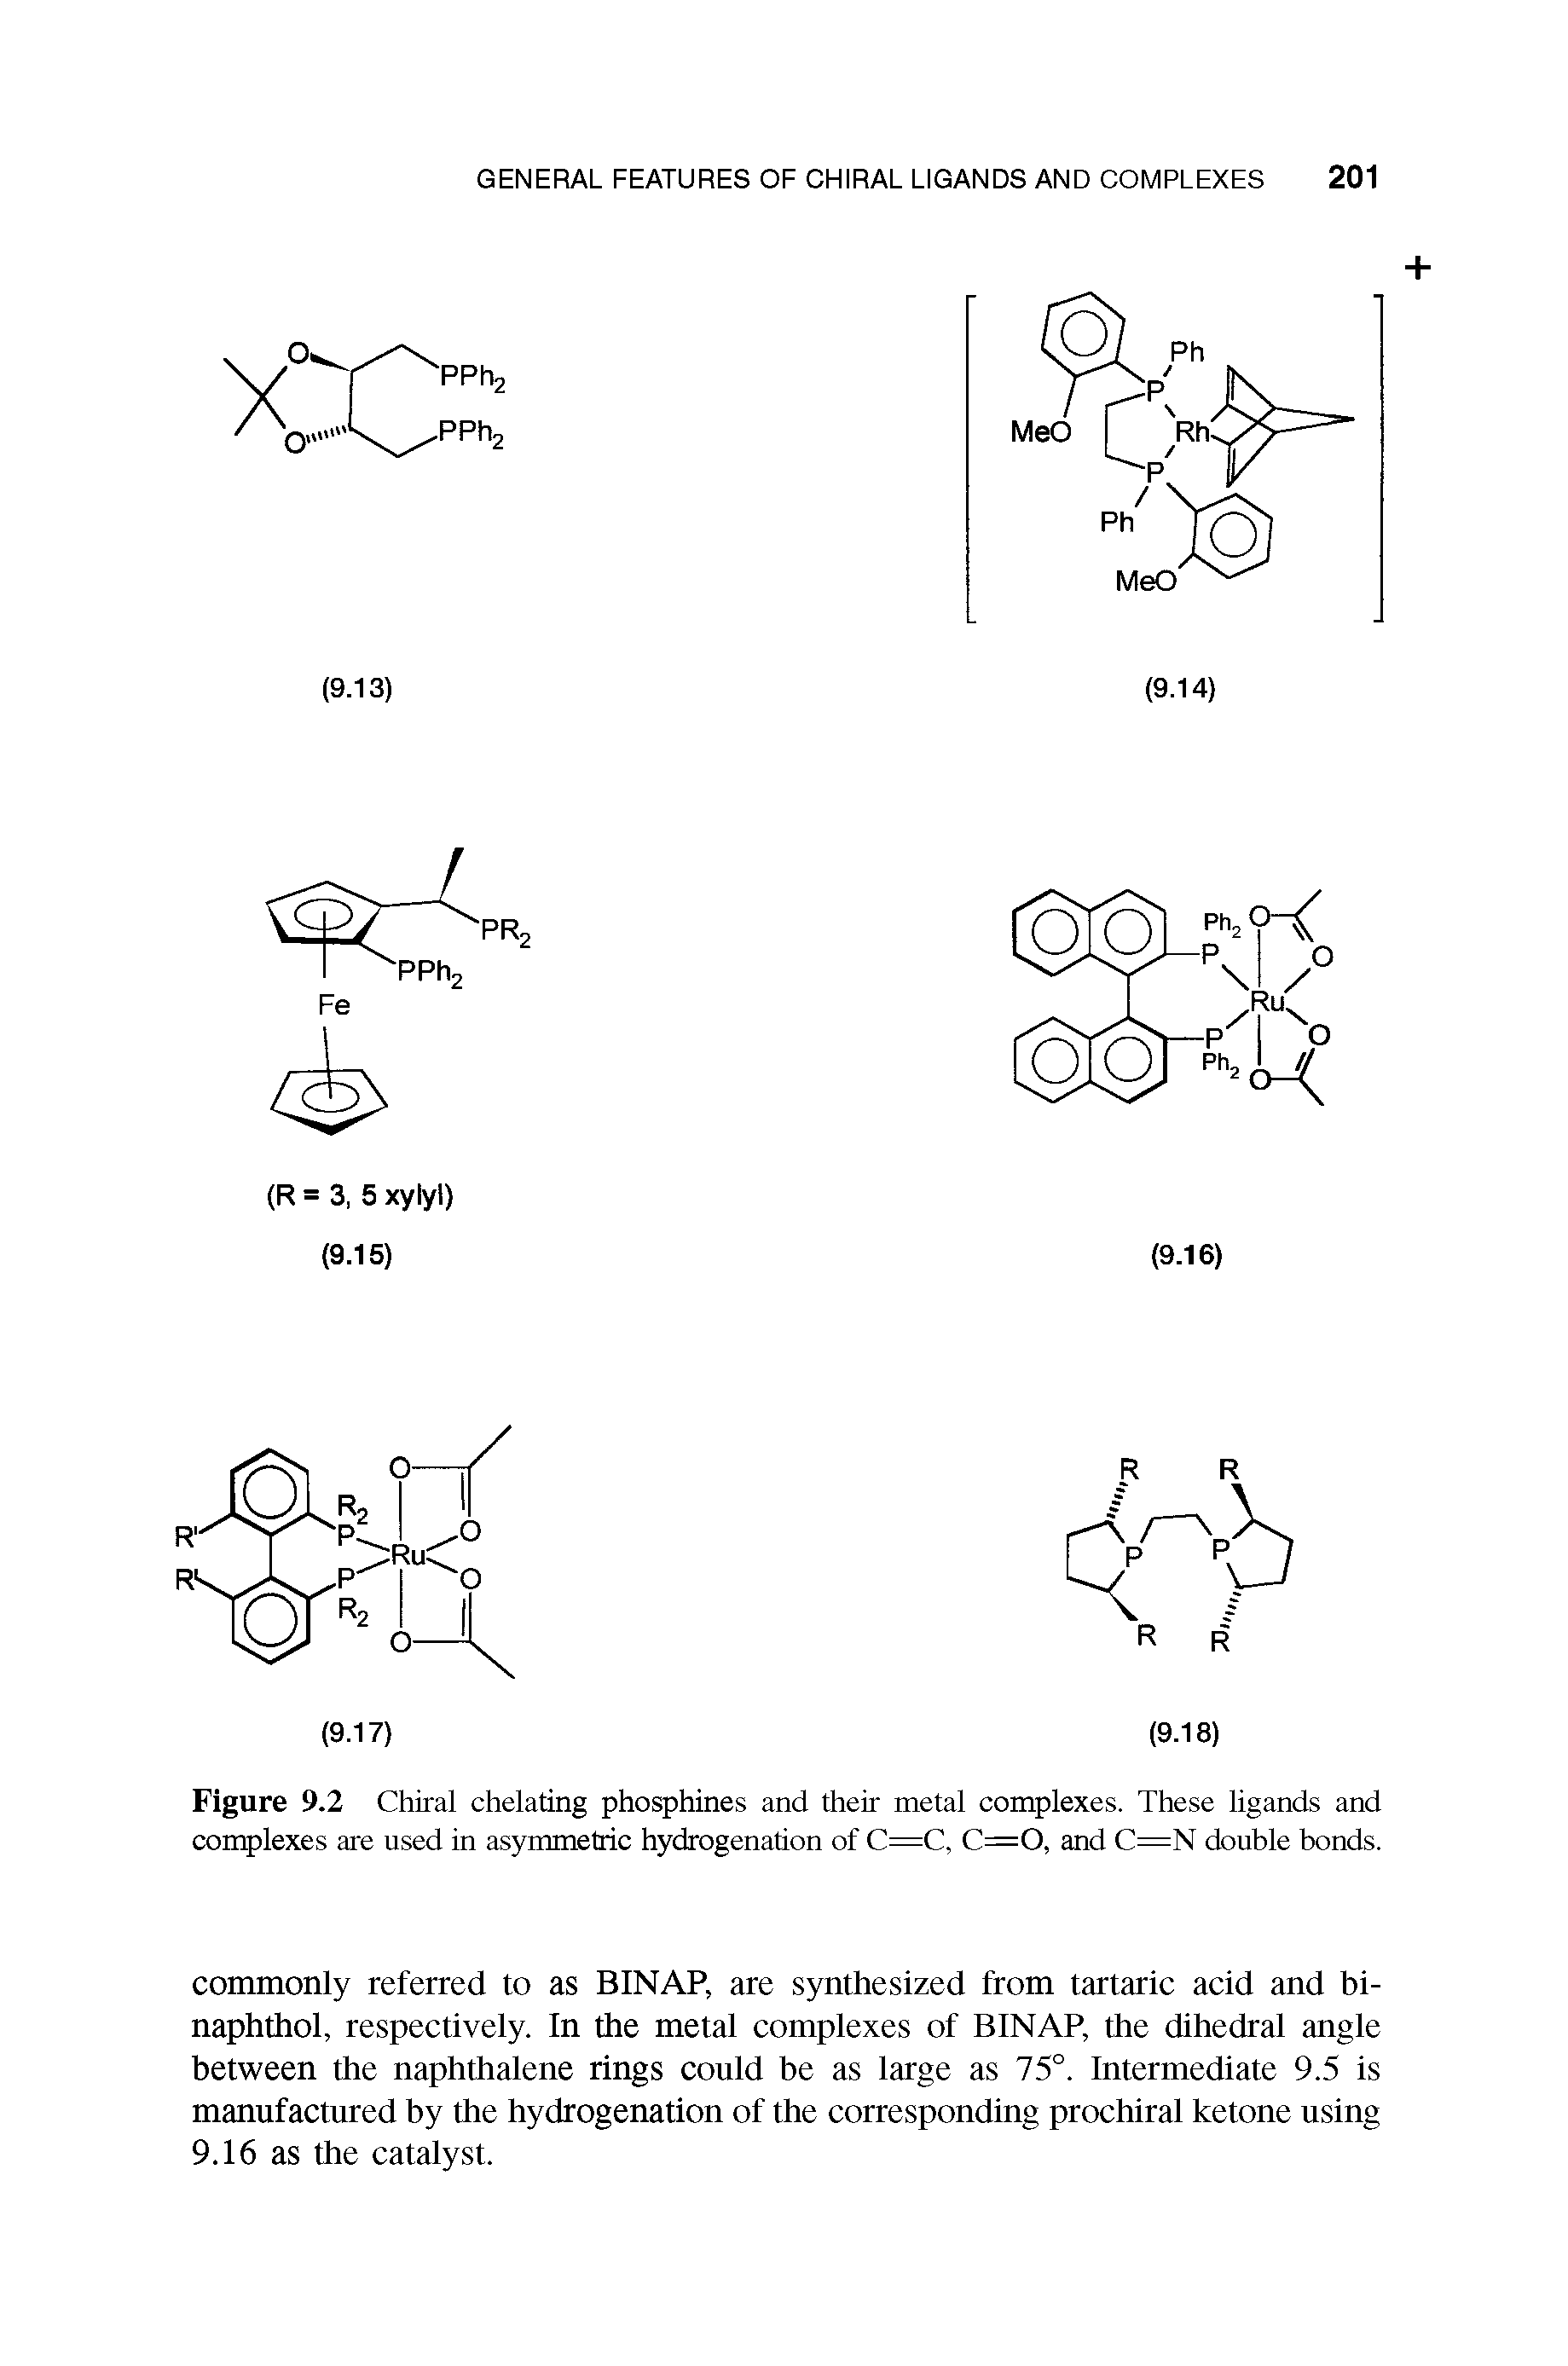 Figure 9.2 Chiral chelating phosphines and their metal complexes. These ligands and complexes are used in asymmetric hydrogenation of C=C, C=0, and C=N double bonds.